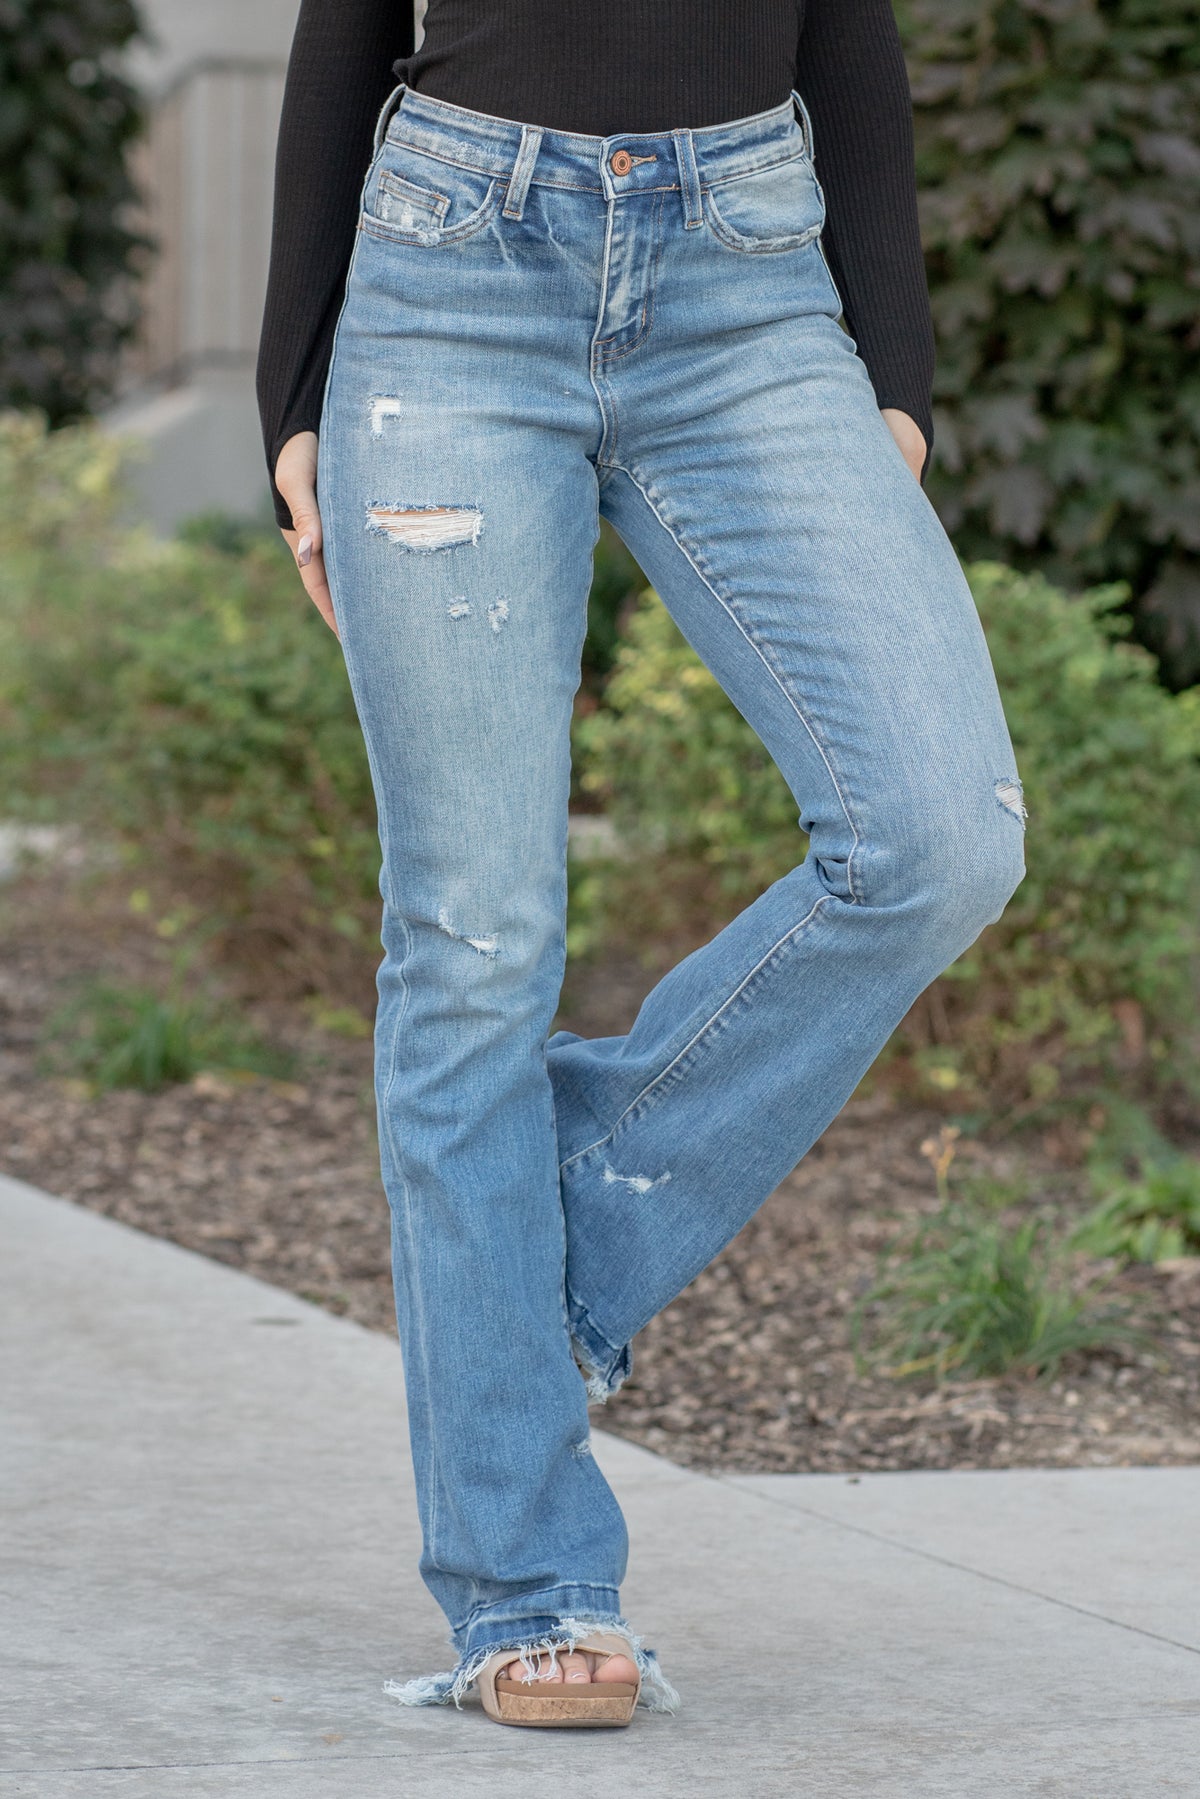 VERVET by Flying Monkey Jeans  This flare features a high rise with single button closure and a 34" inseam for length.  Flare, 34" Inseam*  Rise: High Rise, 10" Front Rise* Leg Opening: 21"* 93% COTTON , 5% POLYESTER , 2% SPANDEX Stitching: Classic  Fly: Zip Fly  Style #: T5435 *Measured on the smallest size, measurements may vary by size.  Contact us for any additional measurements or sizing.  Cas is 5'7" and wears a size 25 in jeans, a small in tops, and 8 in shoes. She is wearing size 25 in these jeans. 